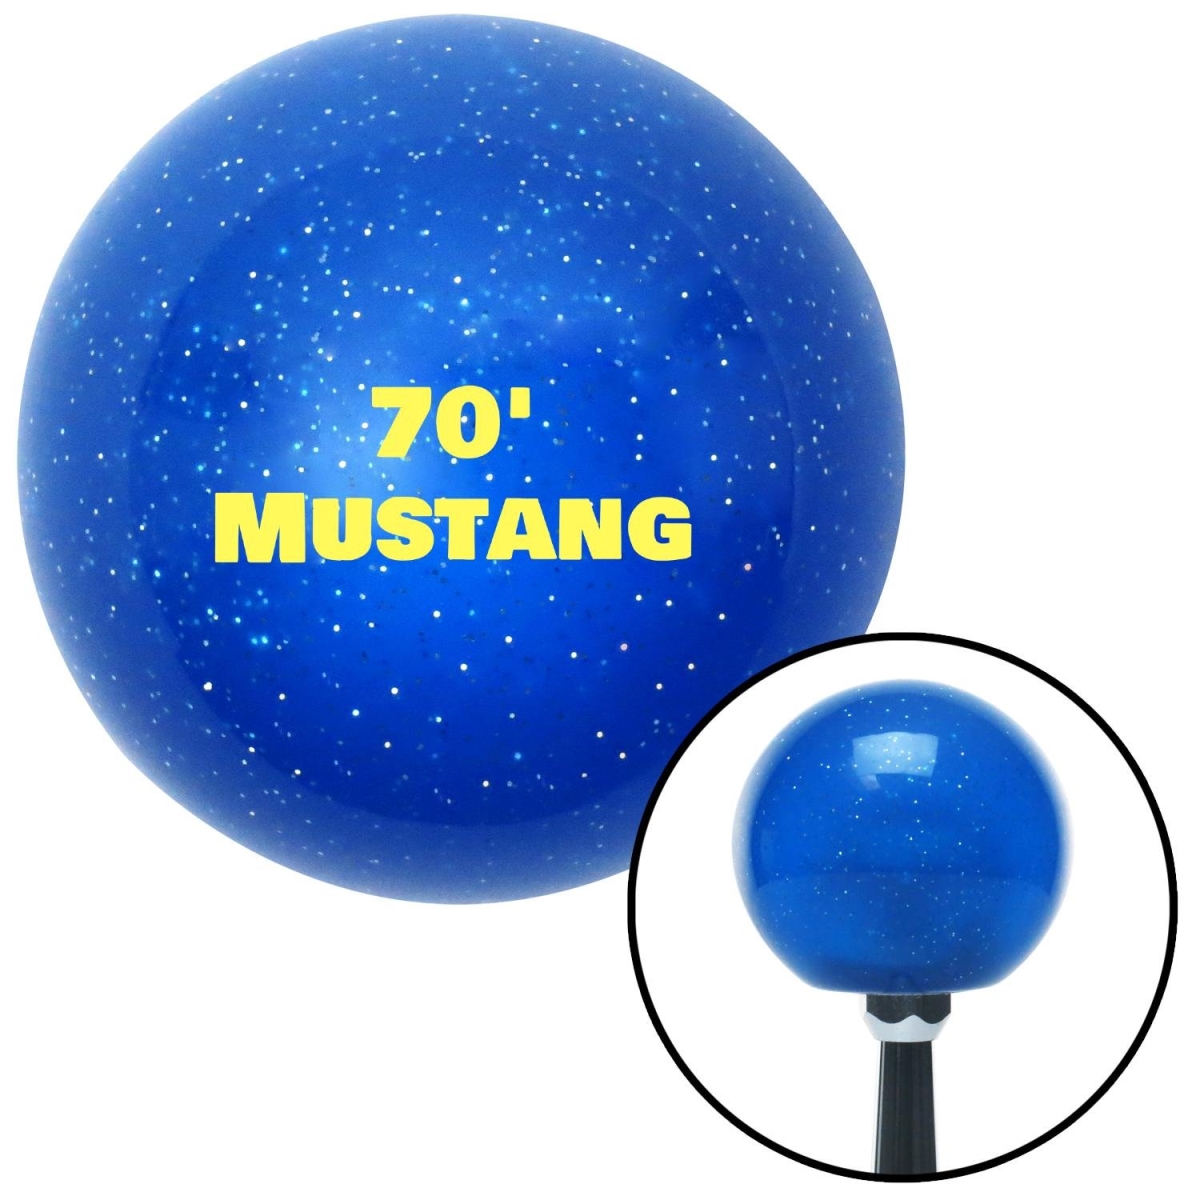 American Shifter 139707 Yellow 70 Mustang Blue Metal Flake Shift Knob with M16 x 1.5 Insert Shifter Auto -  American Shifter Company